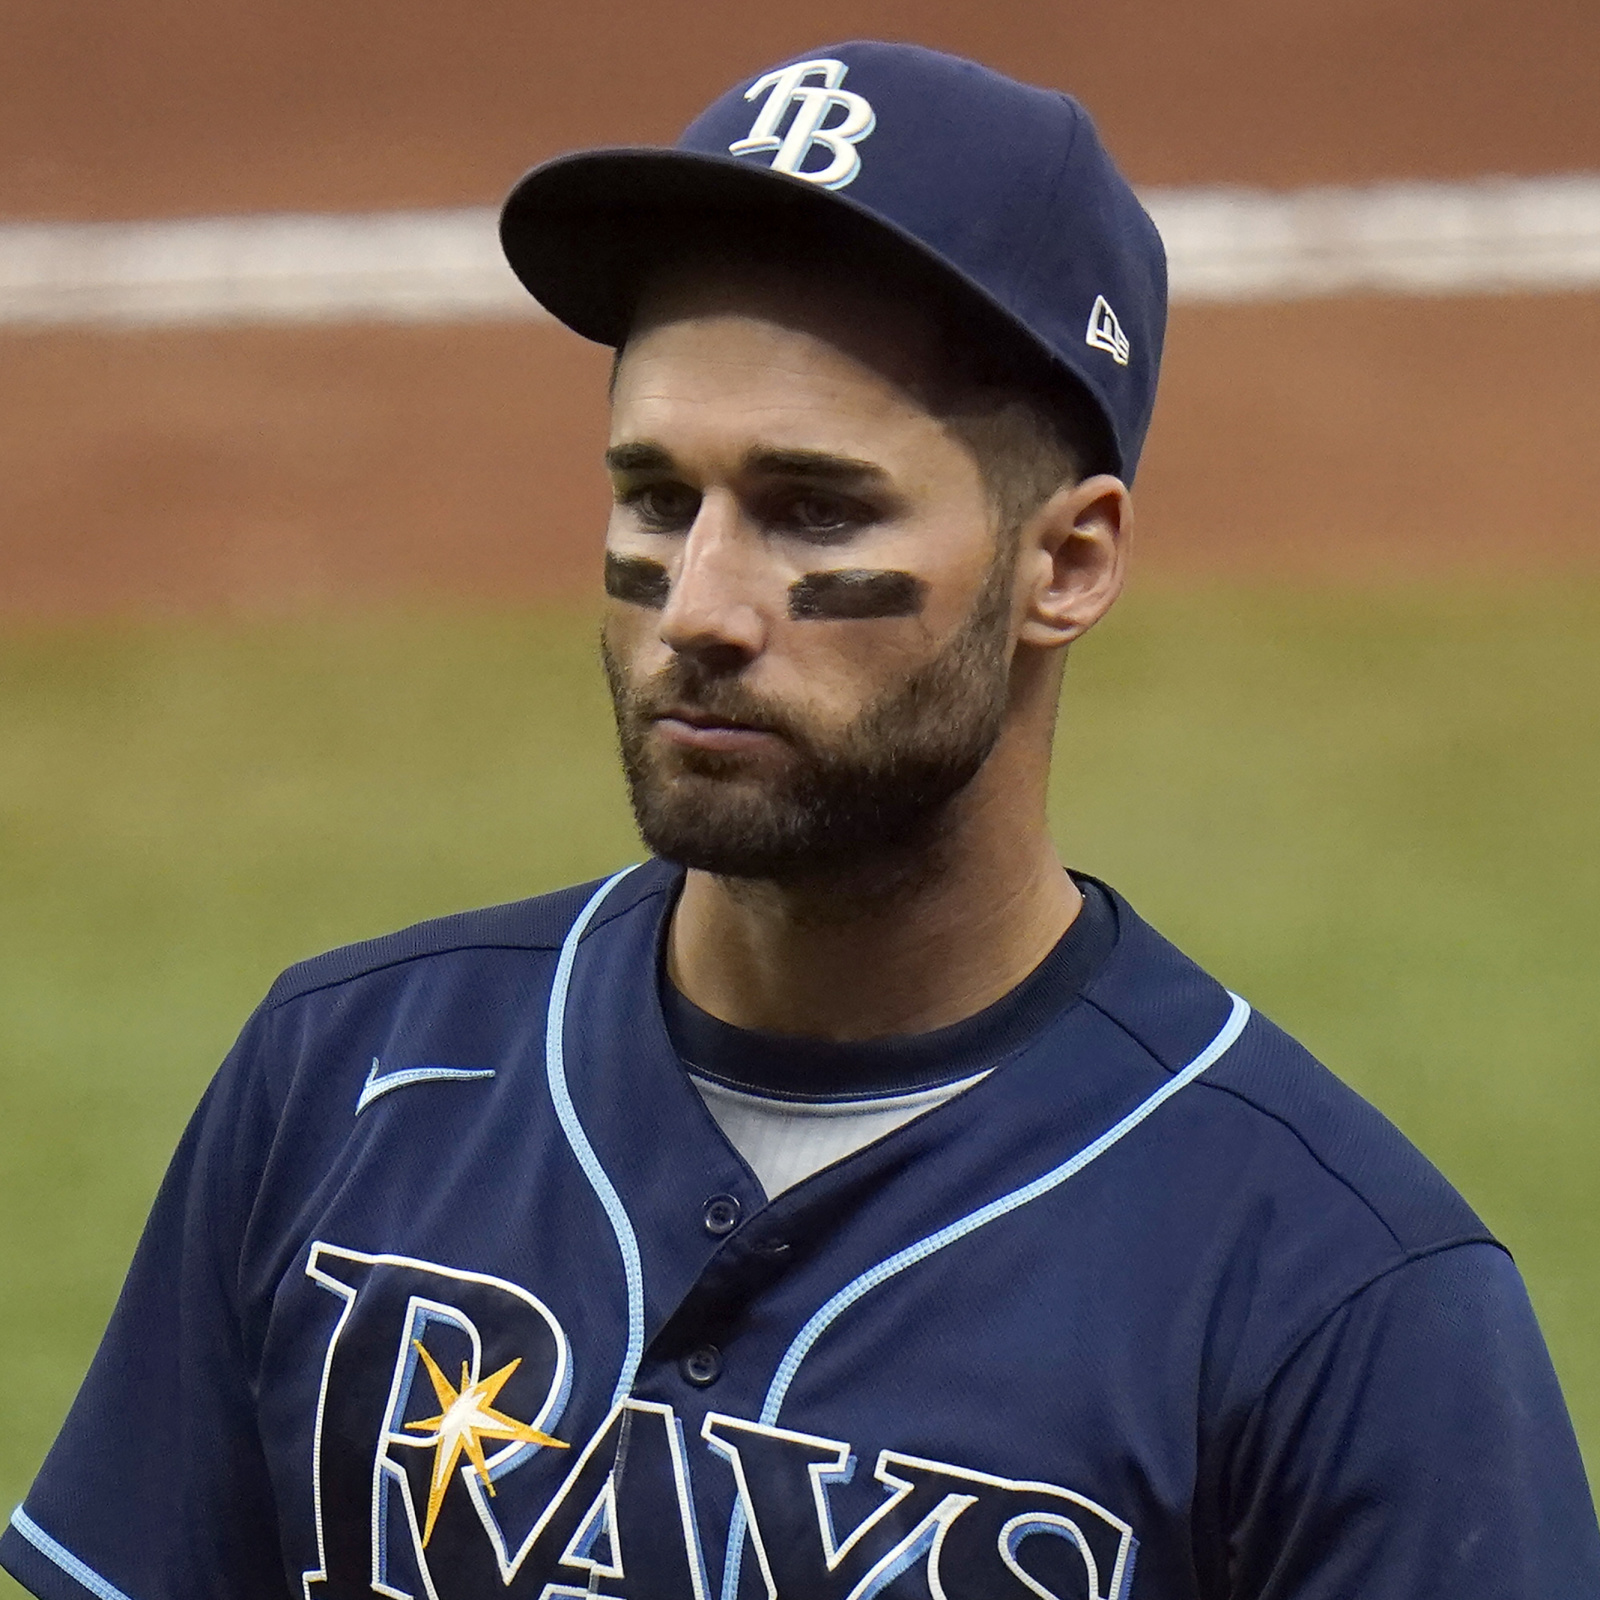 Kevin Kiermaier's $13M Contract Option Declined by Rays; Will Hit